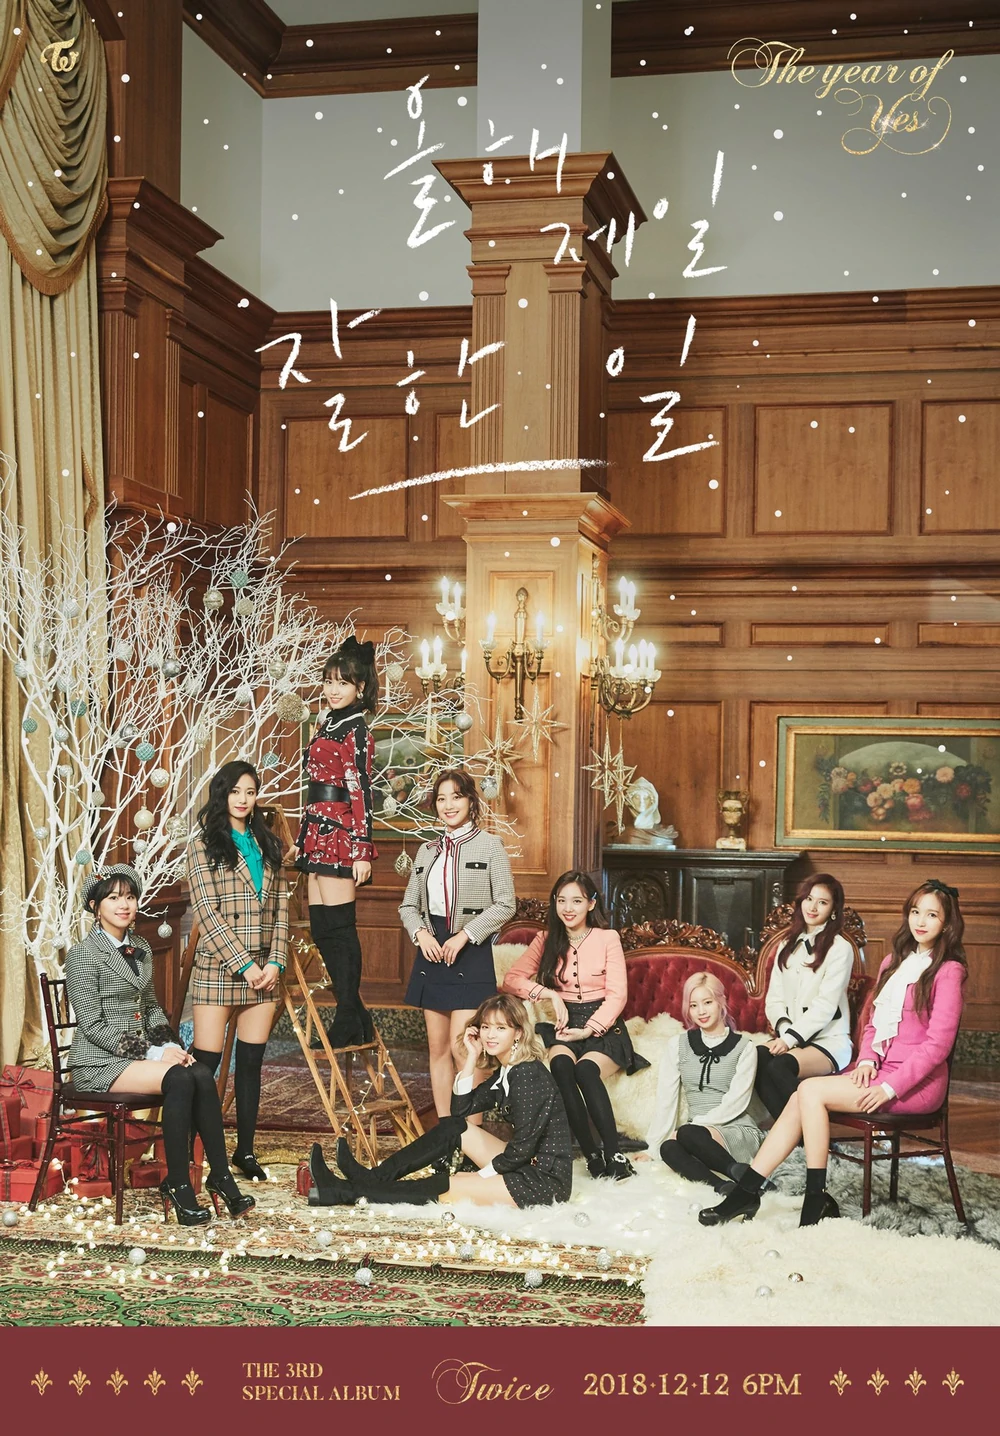 Twice Year Of Yes Group Concept Teaser Picture Image Photo Kpop K-Concept 1